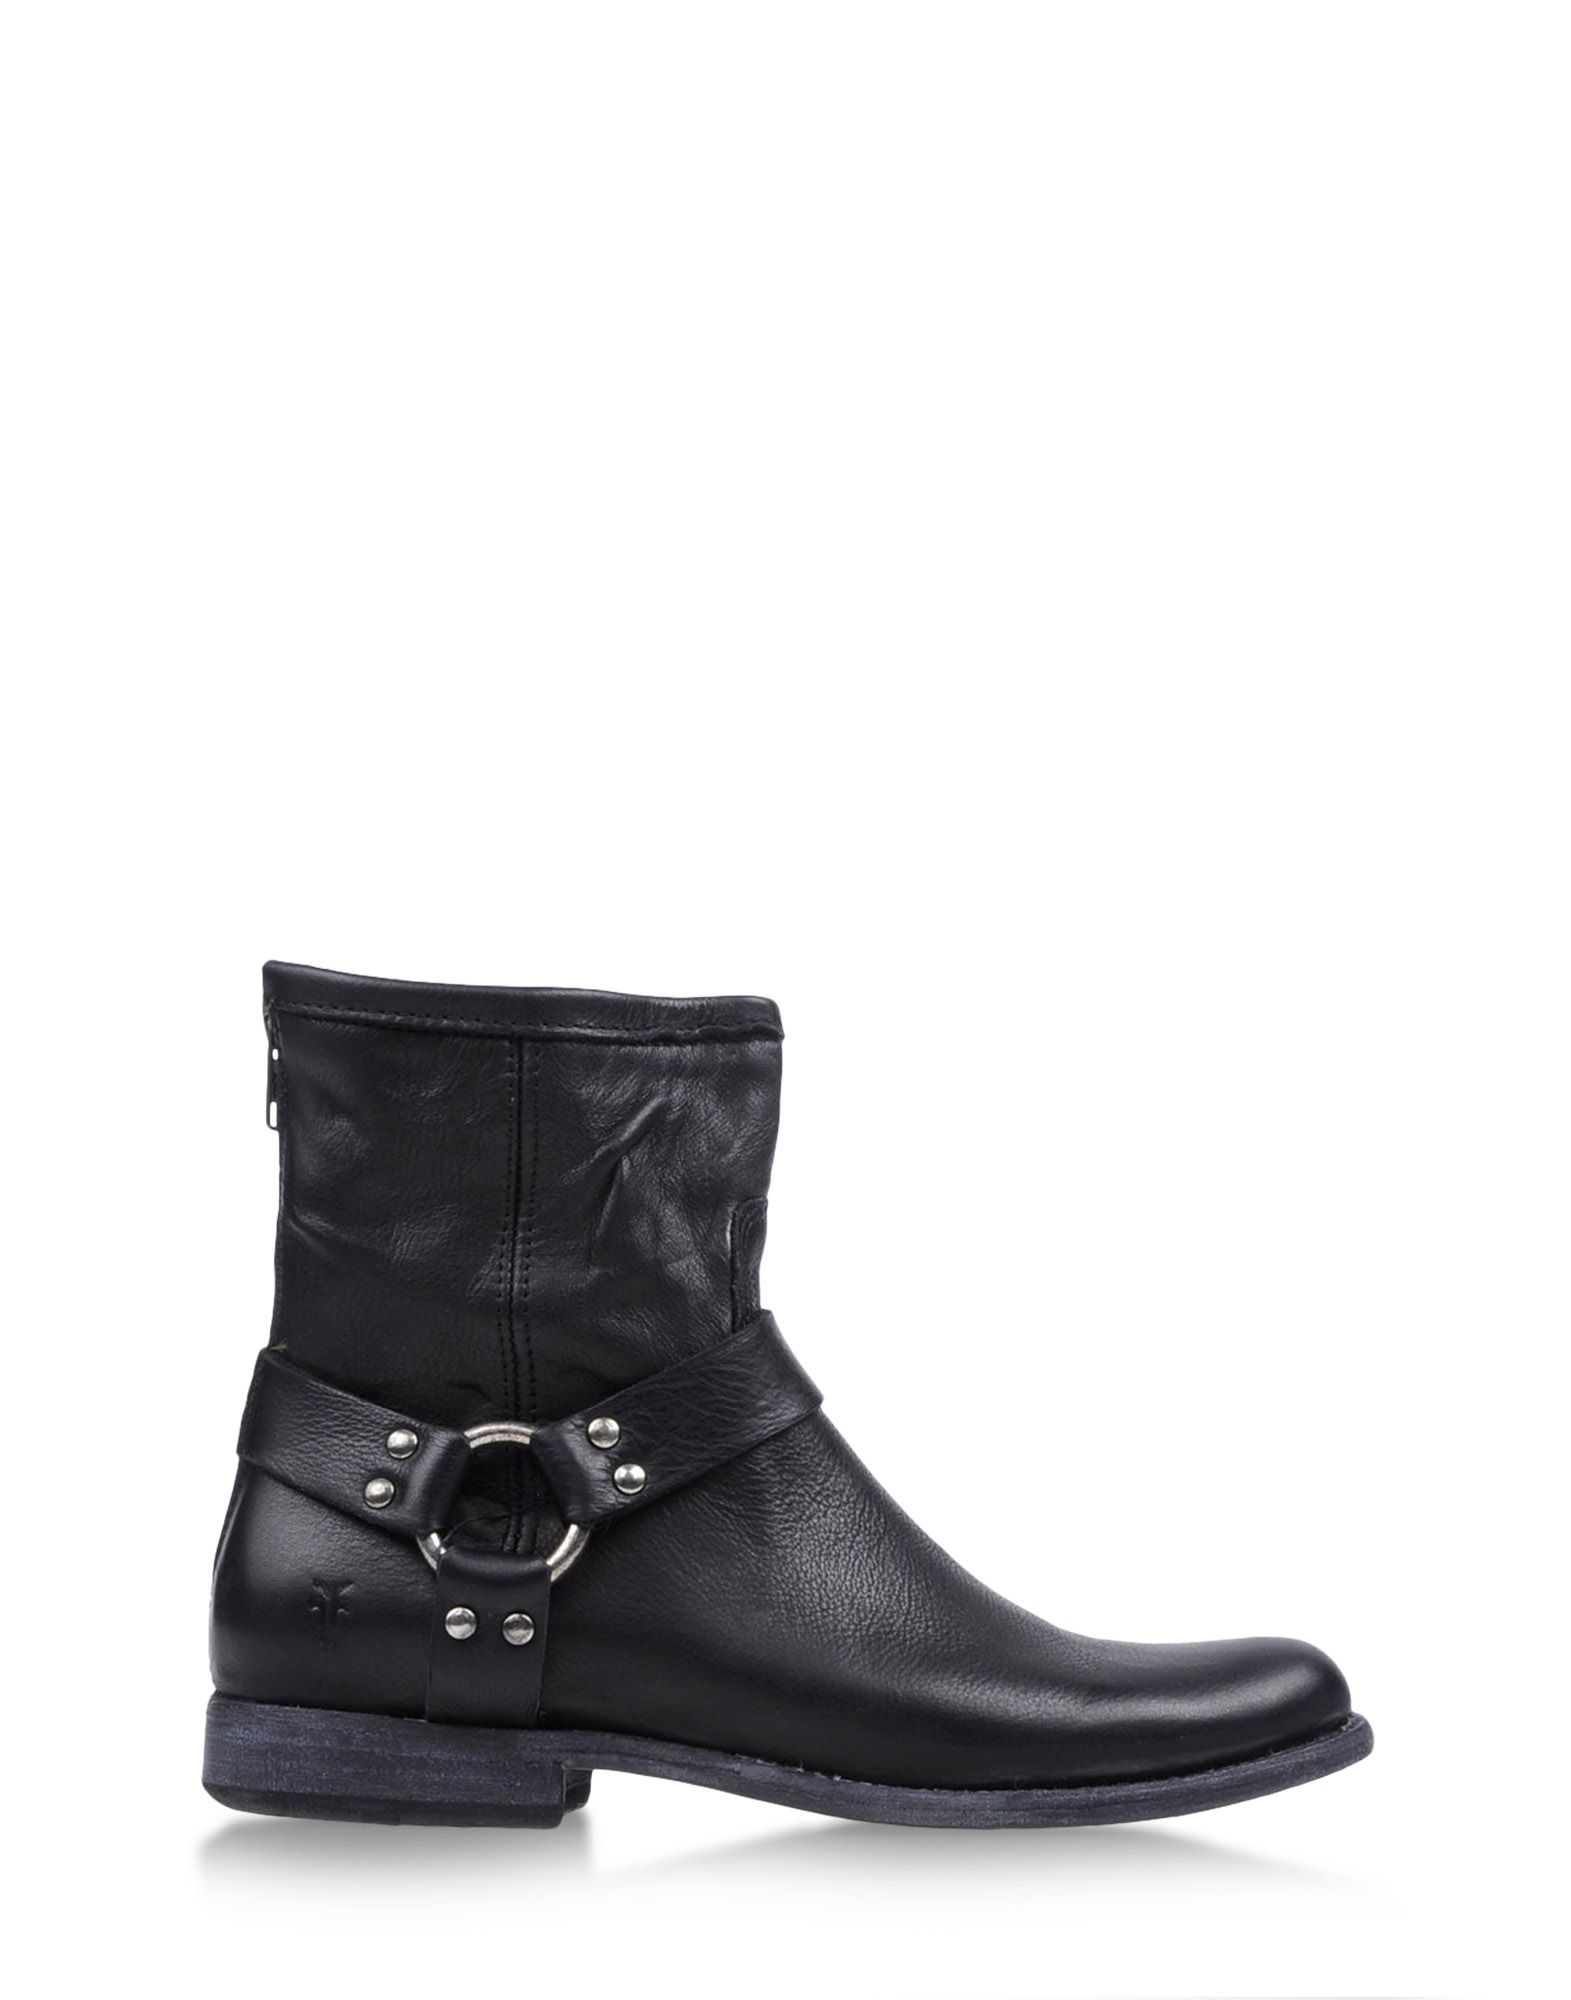 Frye Ankle Boots in Black | Lyst